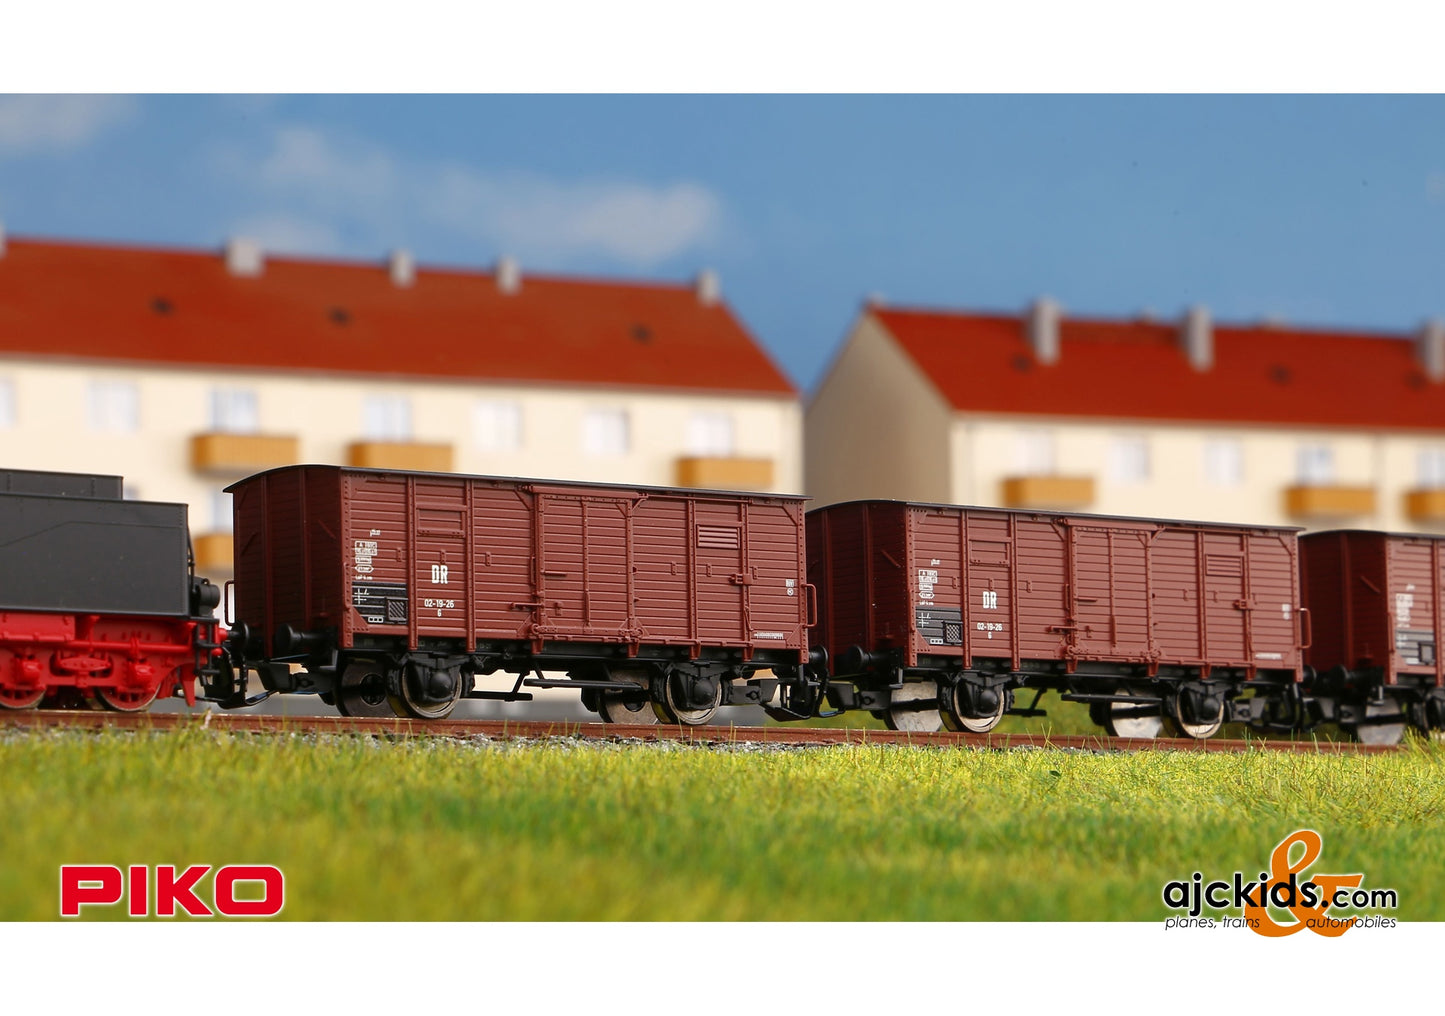 Piko 47761 - TT-Covered Freight Car G02 DR III o. Bhs